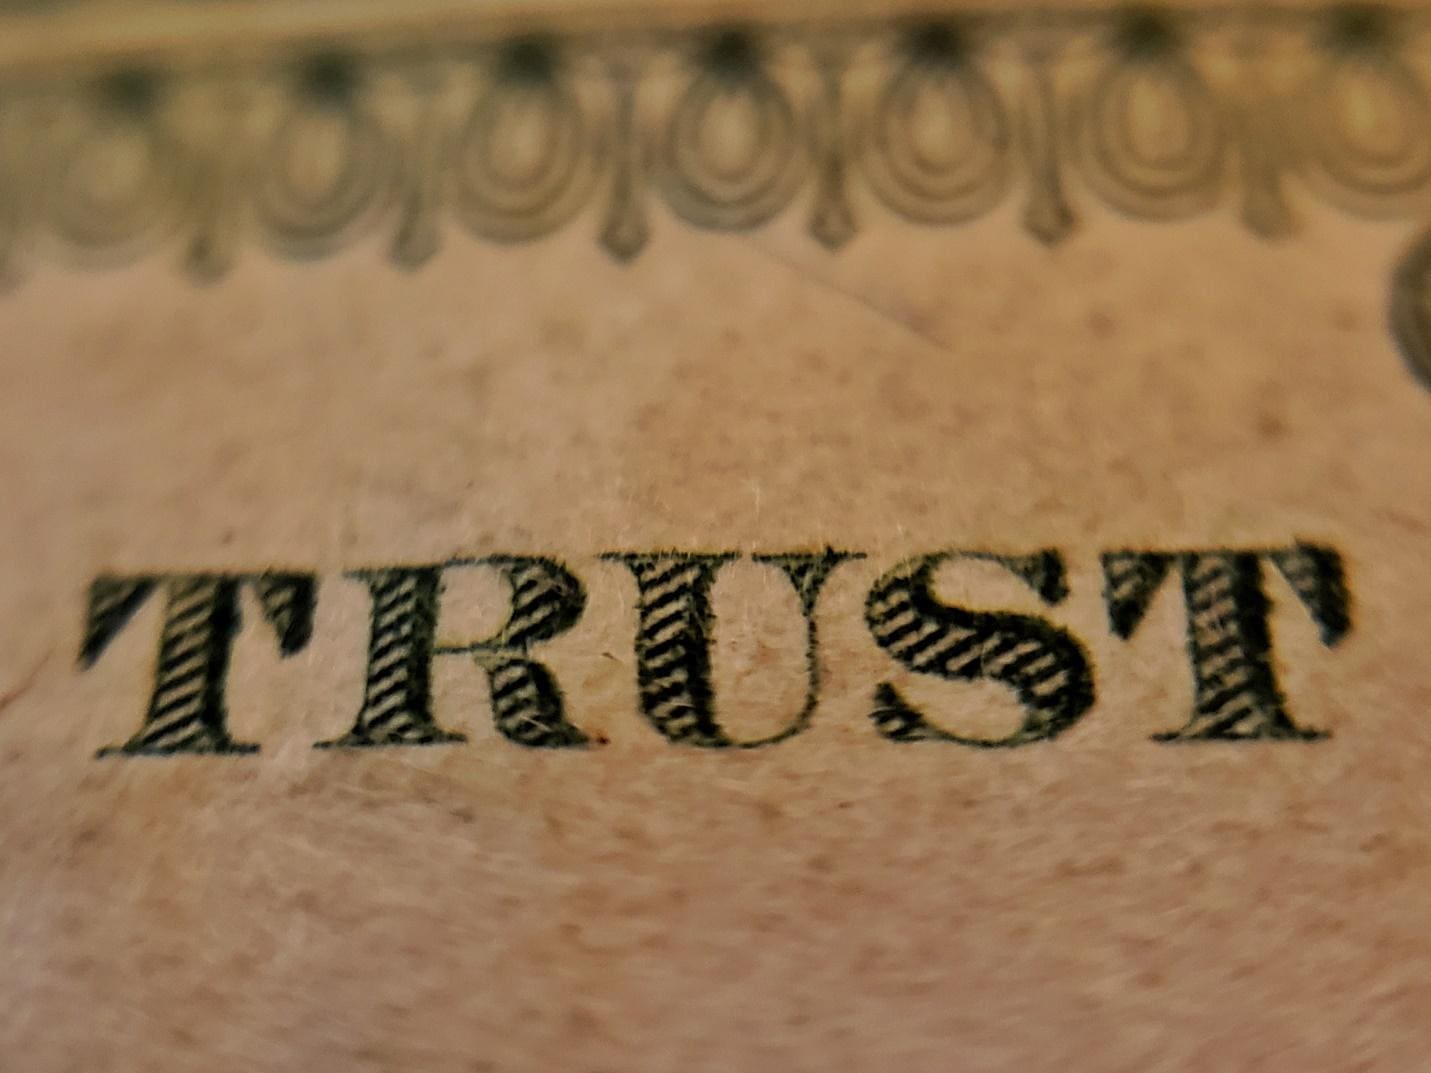 How to Resolve Trust and Estate Disputes Peacefully